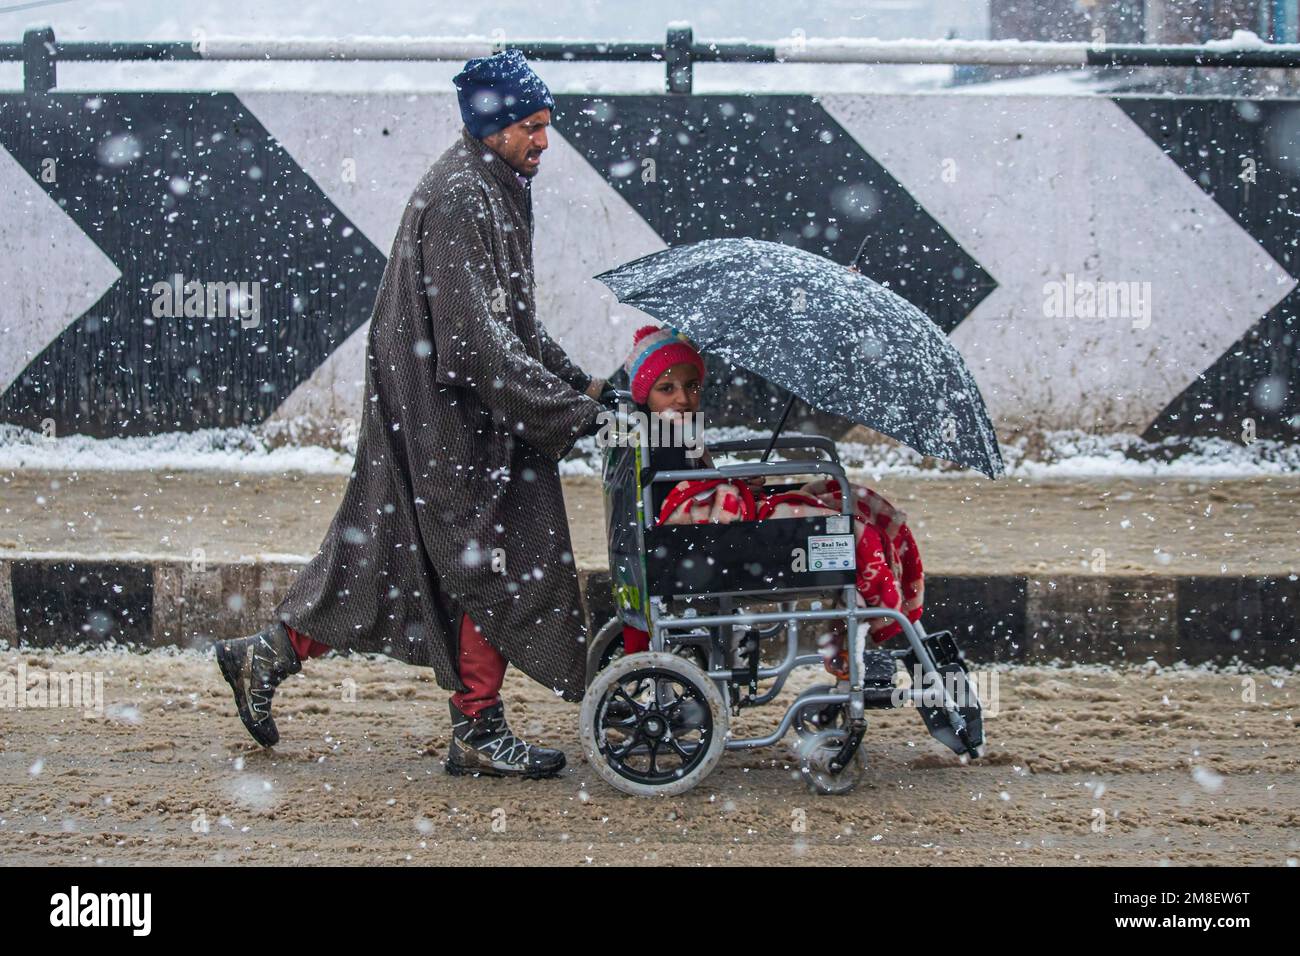 A father carrying his allying son on a wheel chair as he walks through a street amid ongoing heavy snowfall on the outskirts of Srinagar. At least two labourers killed on Thursday after an avalanche hits high-altitude area in central Kashmir's Sonamarg. Most parts of Kashmir received fresh snowfall that leading to the closure of Kashmir capital's main highway that connects disputed region with the rest of India. Meanwhile airport authorities suspended all flight operations till further notice due to continuous snowfall and low visibility. (Photo by Faisal Bashir/SOPA Images/Sipa USA) Stock Photo